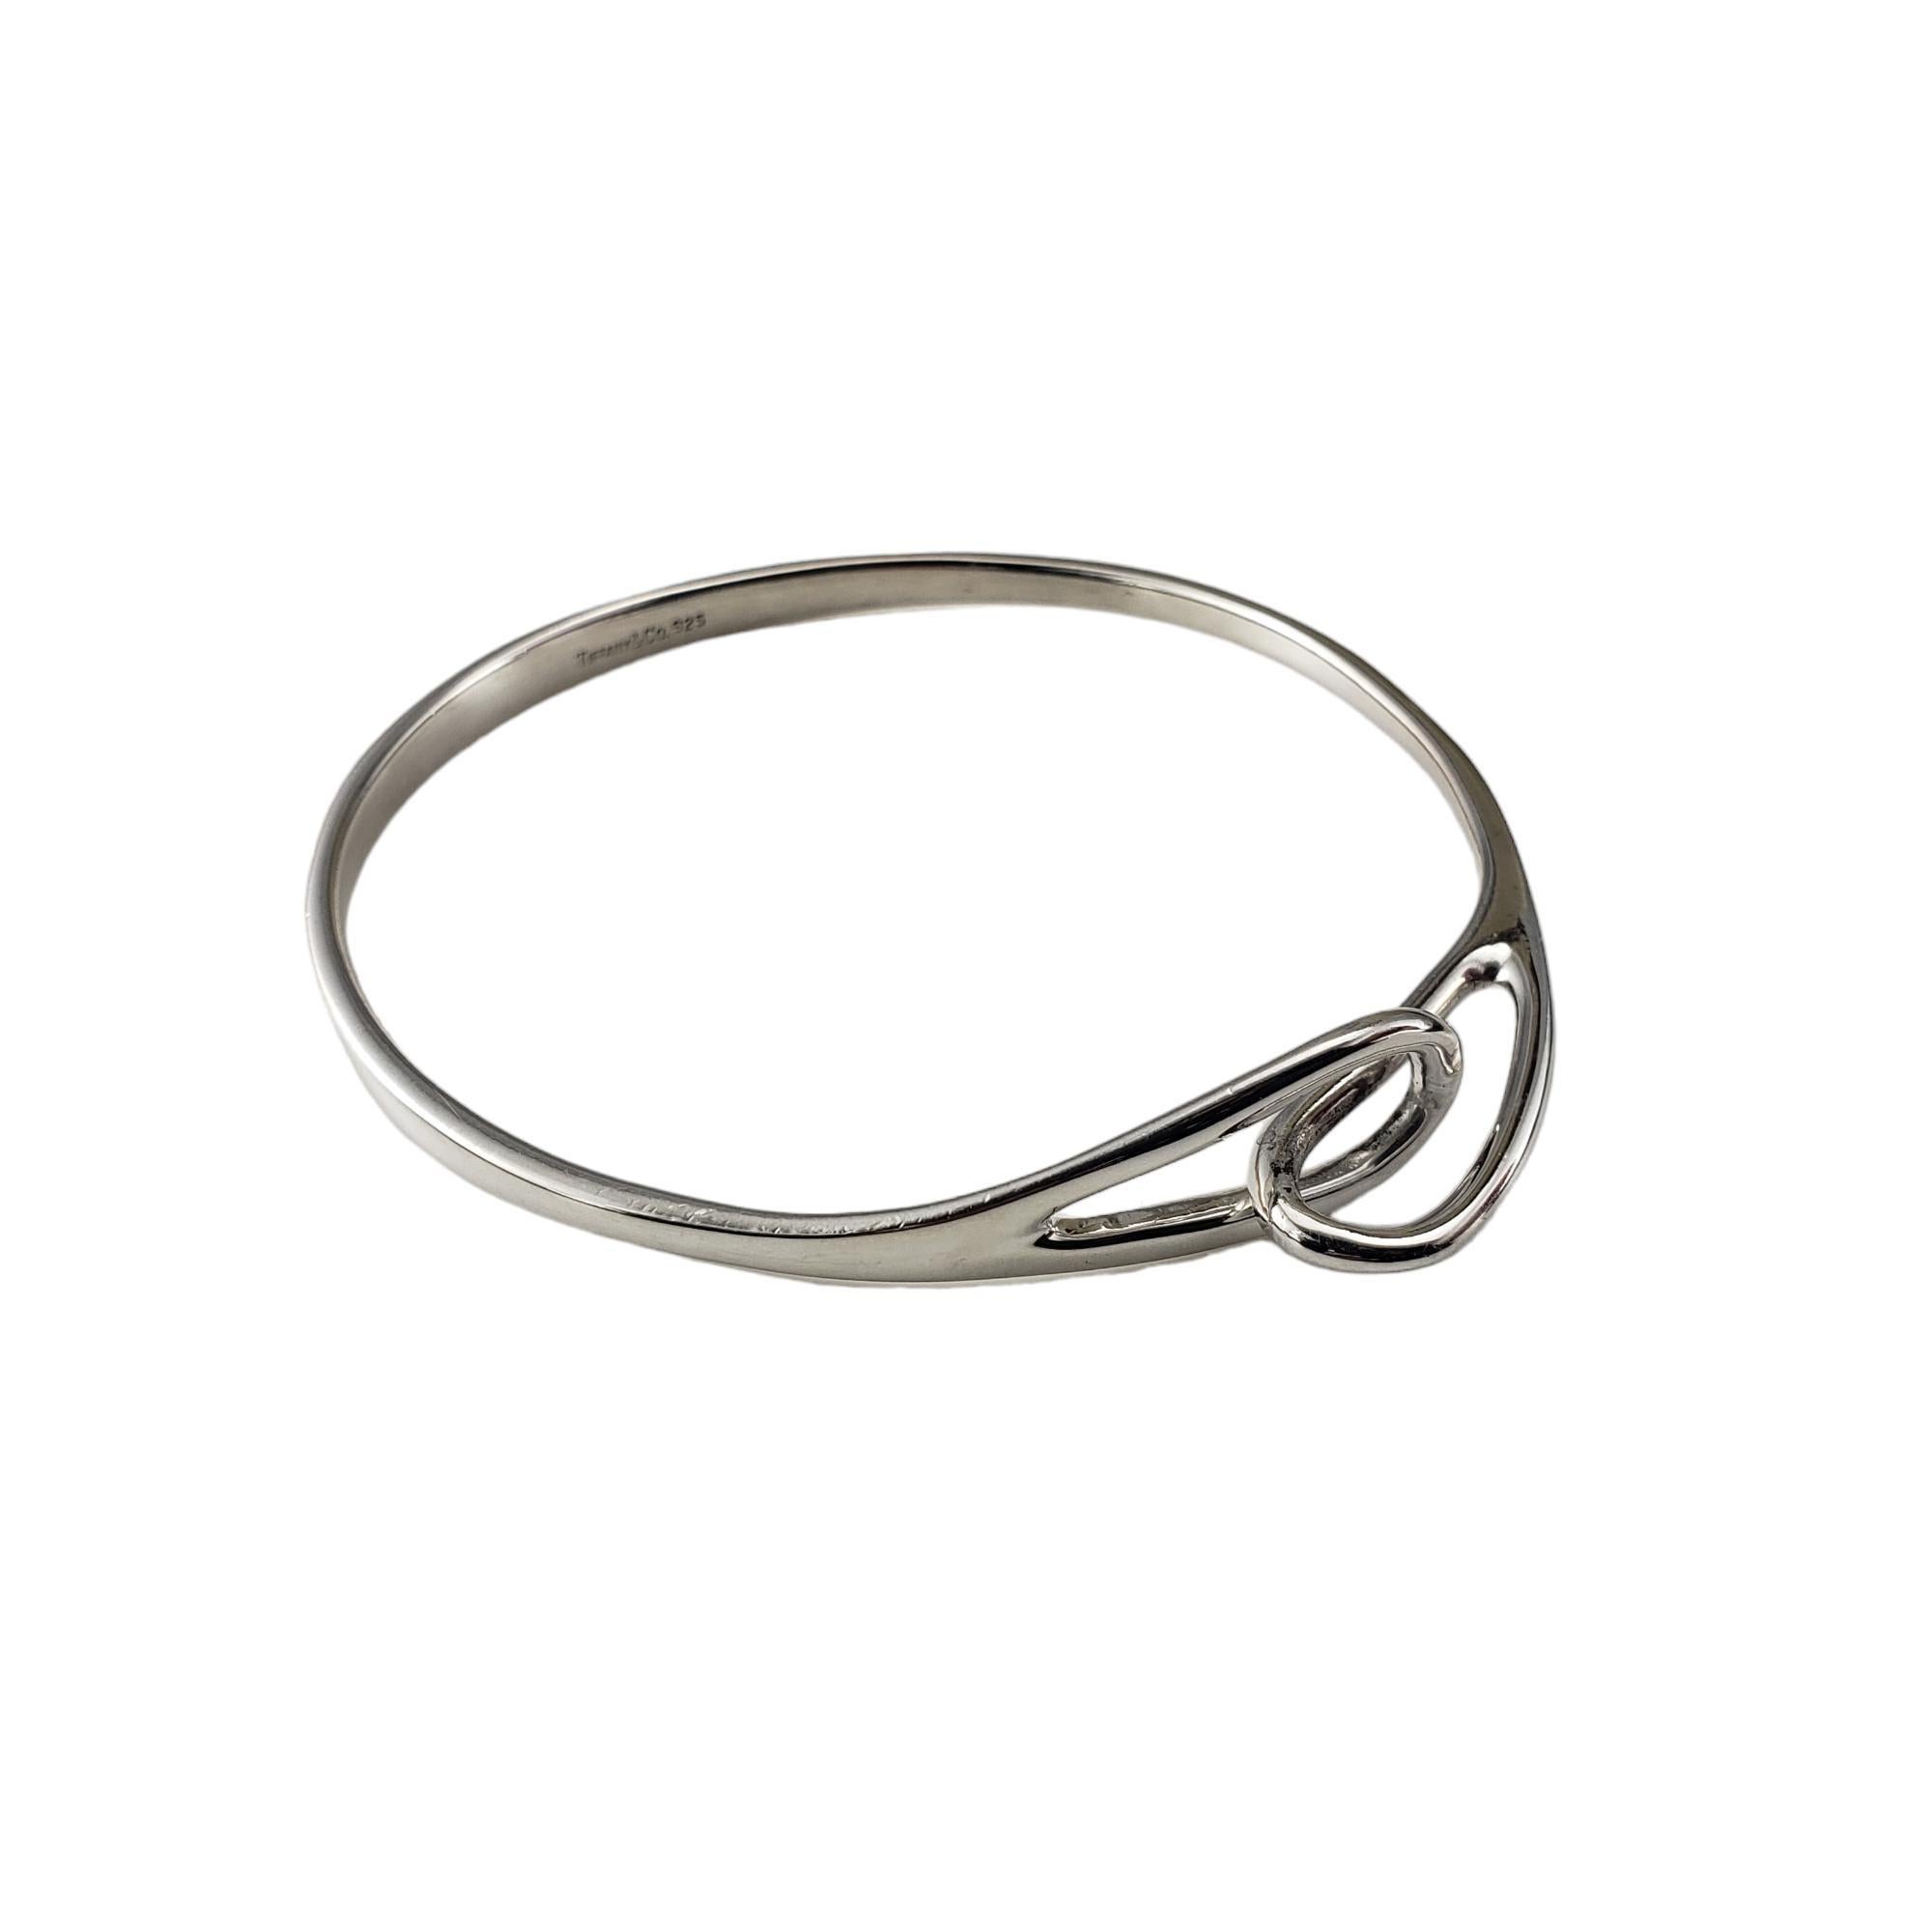 Tiffany & Co. Sterling Silver Double Loop Interlocking Bangle Bracelet-

This lovely double loop interlocking bangle bracelet by Tiffany & Co. is crafted in classic sterling silver.

Size: 7 inches

Hallmark: TIFFANY & CO. 925

Weight: 8.8 dwt./